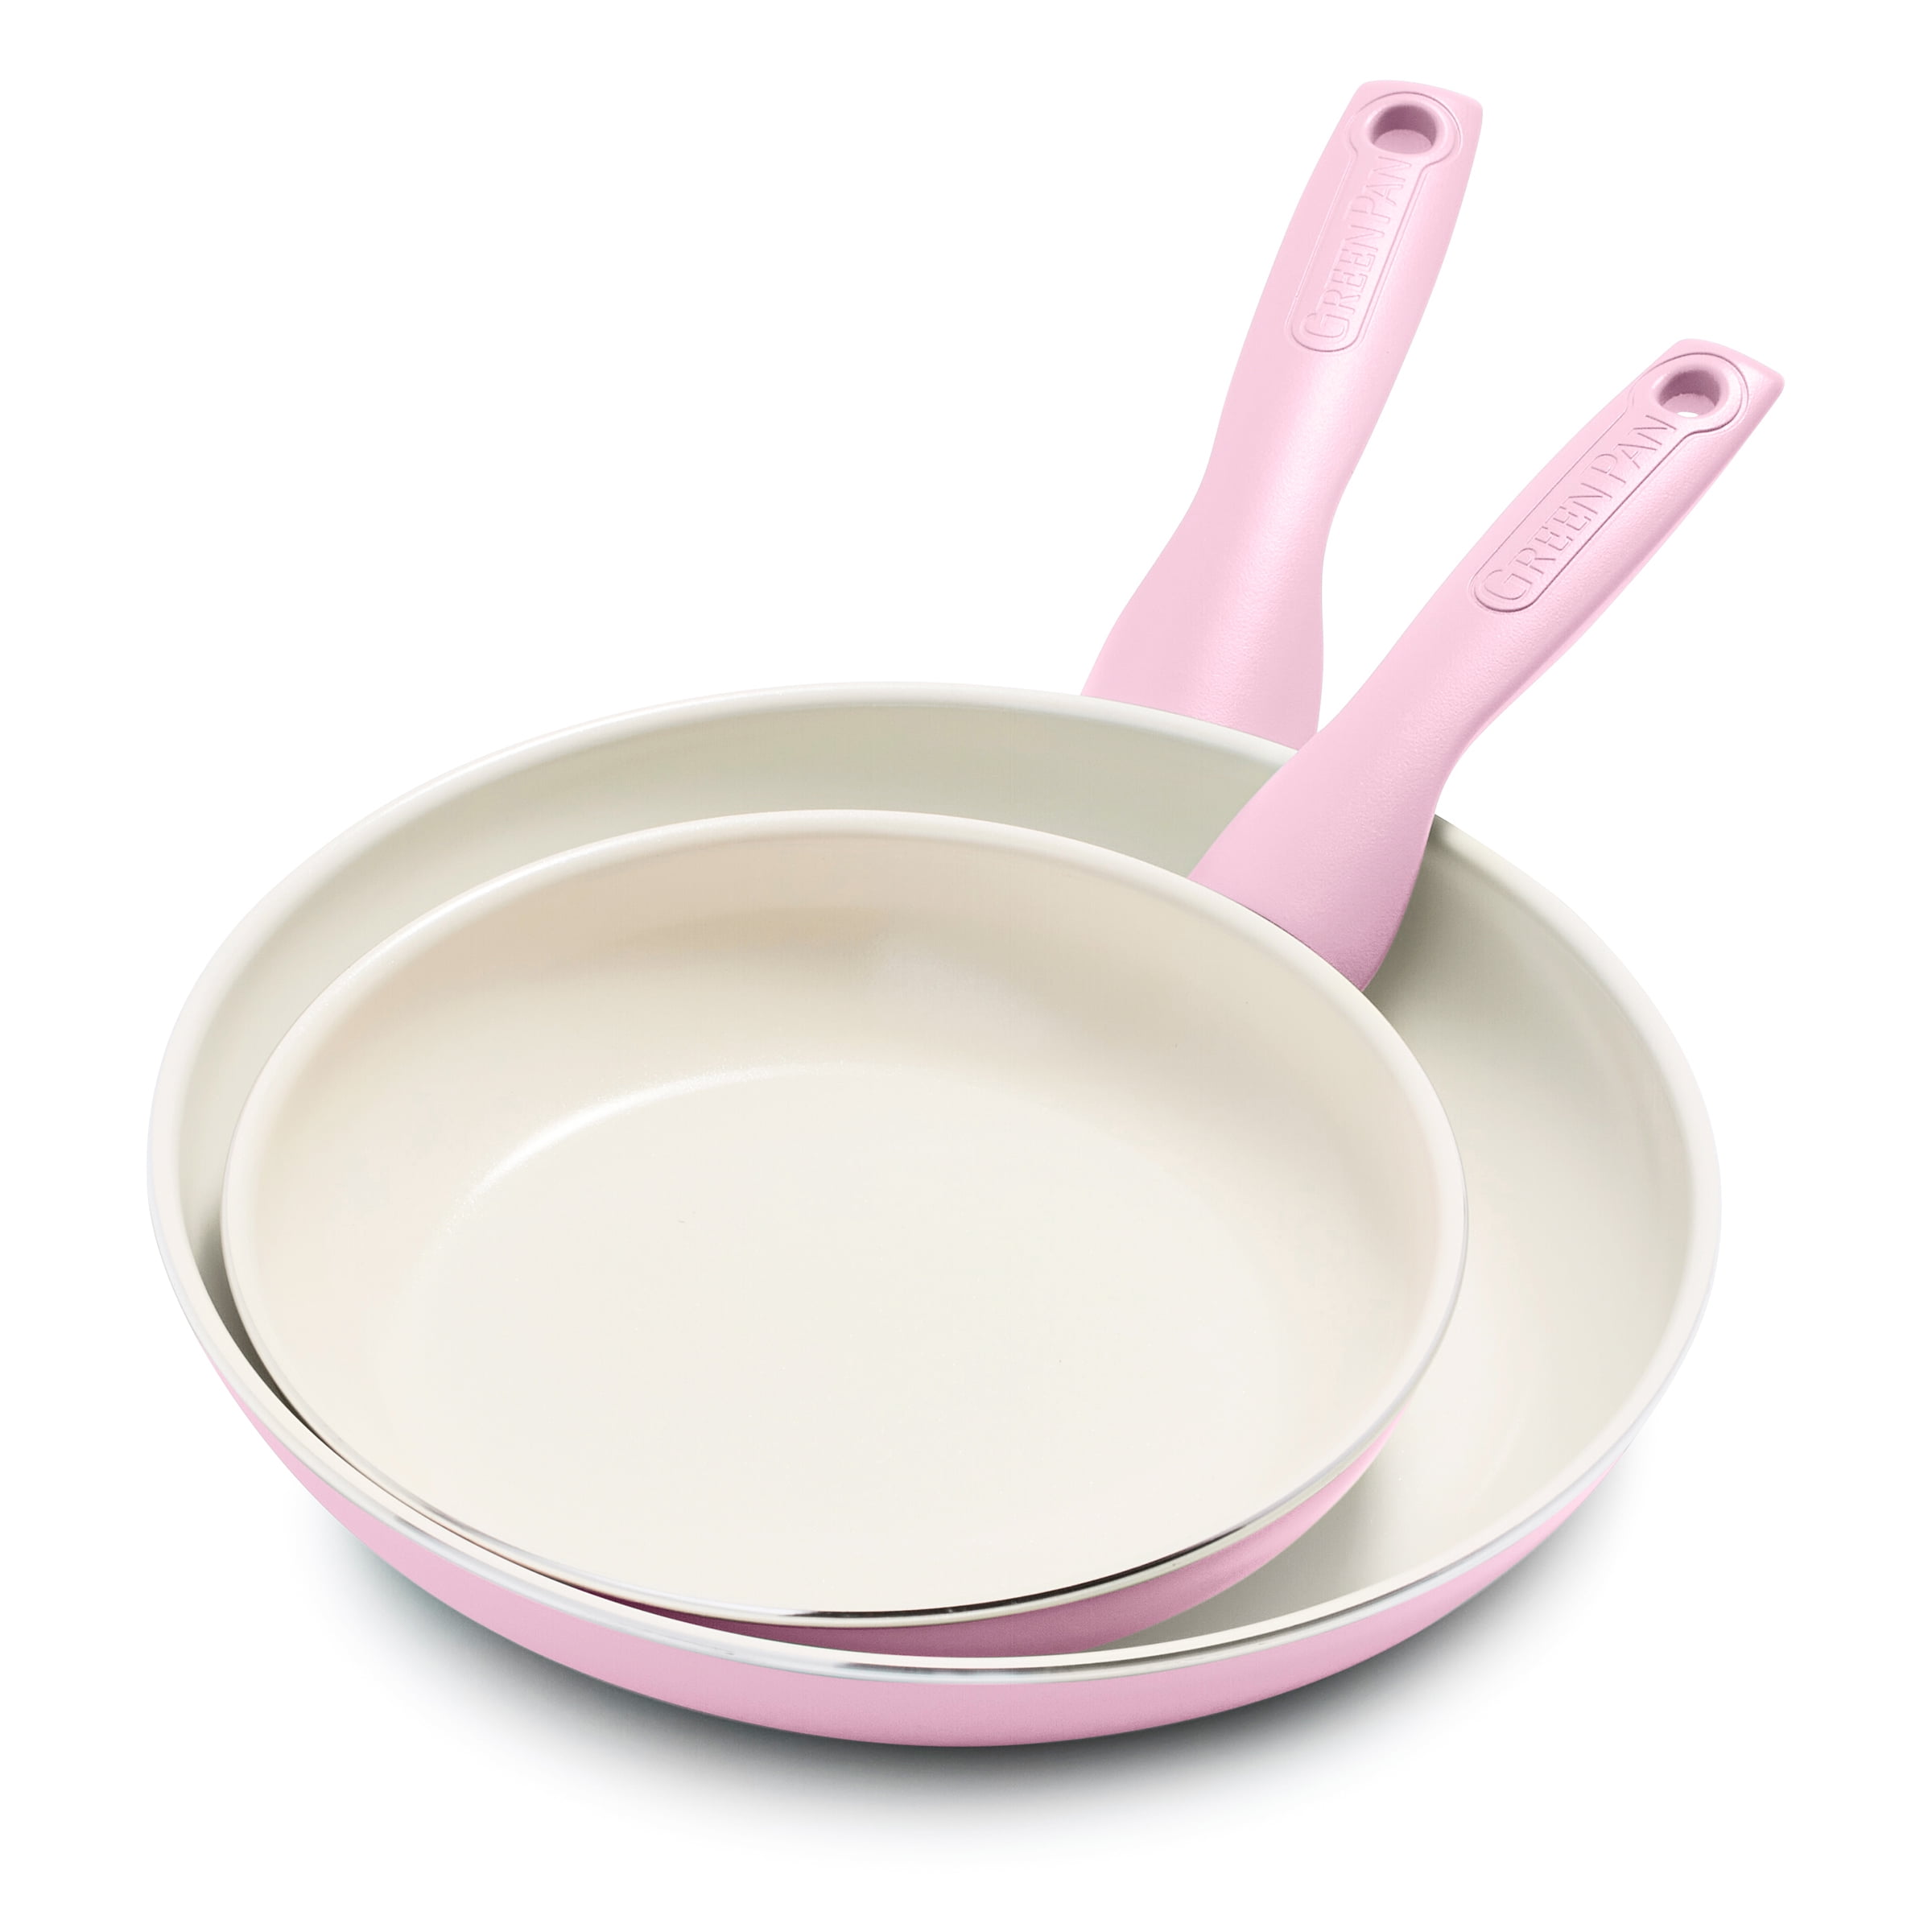 GreenLife Soft Grip Healthy Ceramic Nonstick, 7 and 10 Frying Pan Skillet Set, PFAS-Free, Dishwasher Safe, Bright Pink